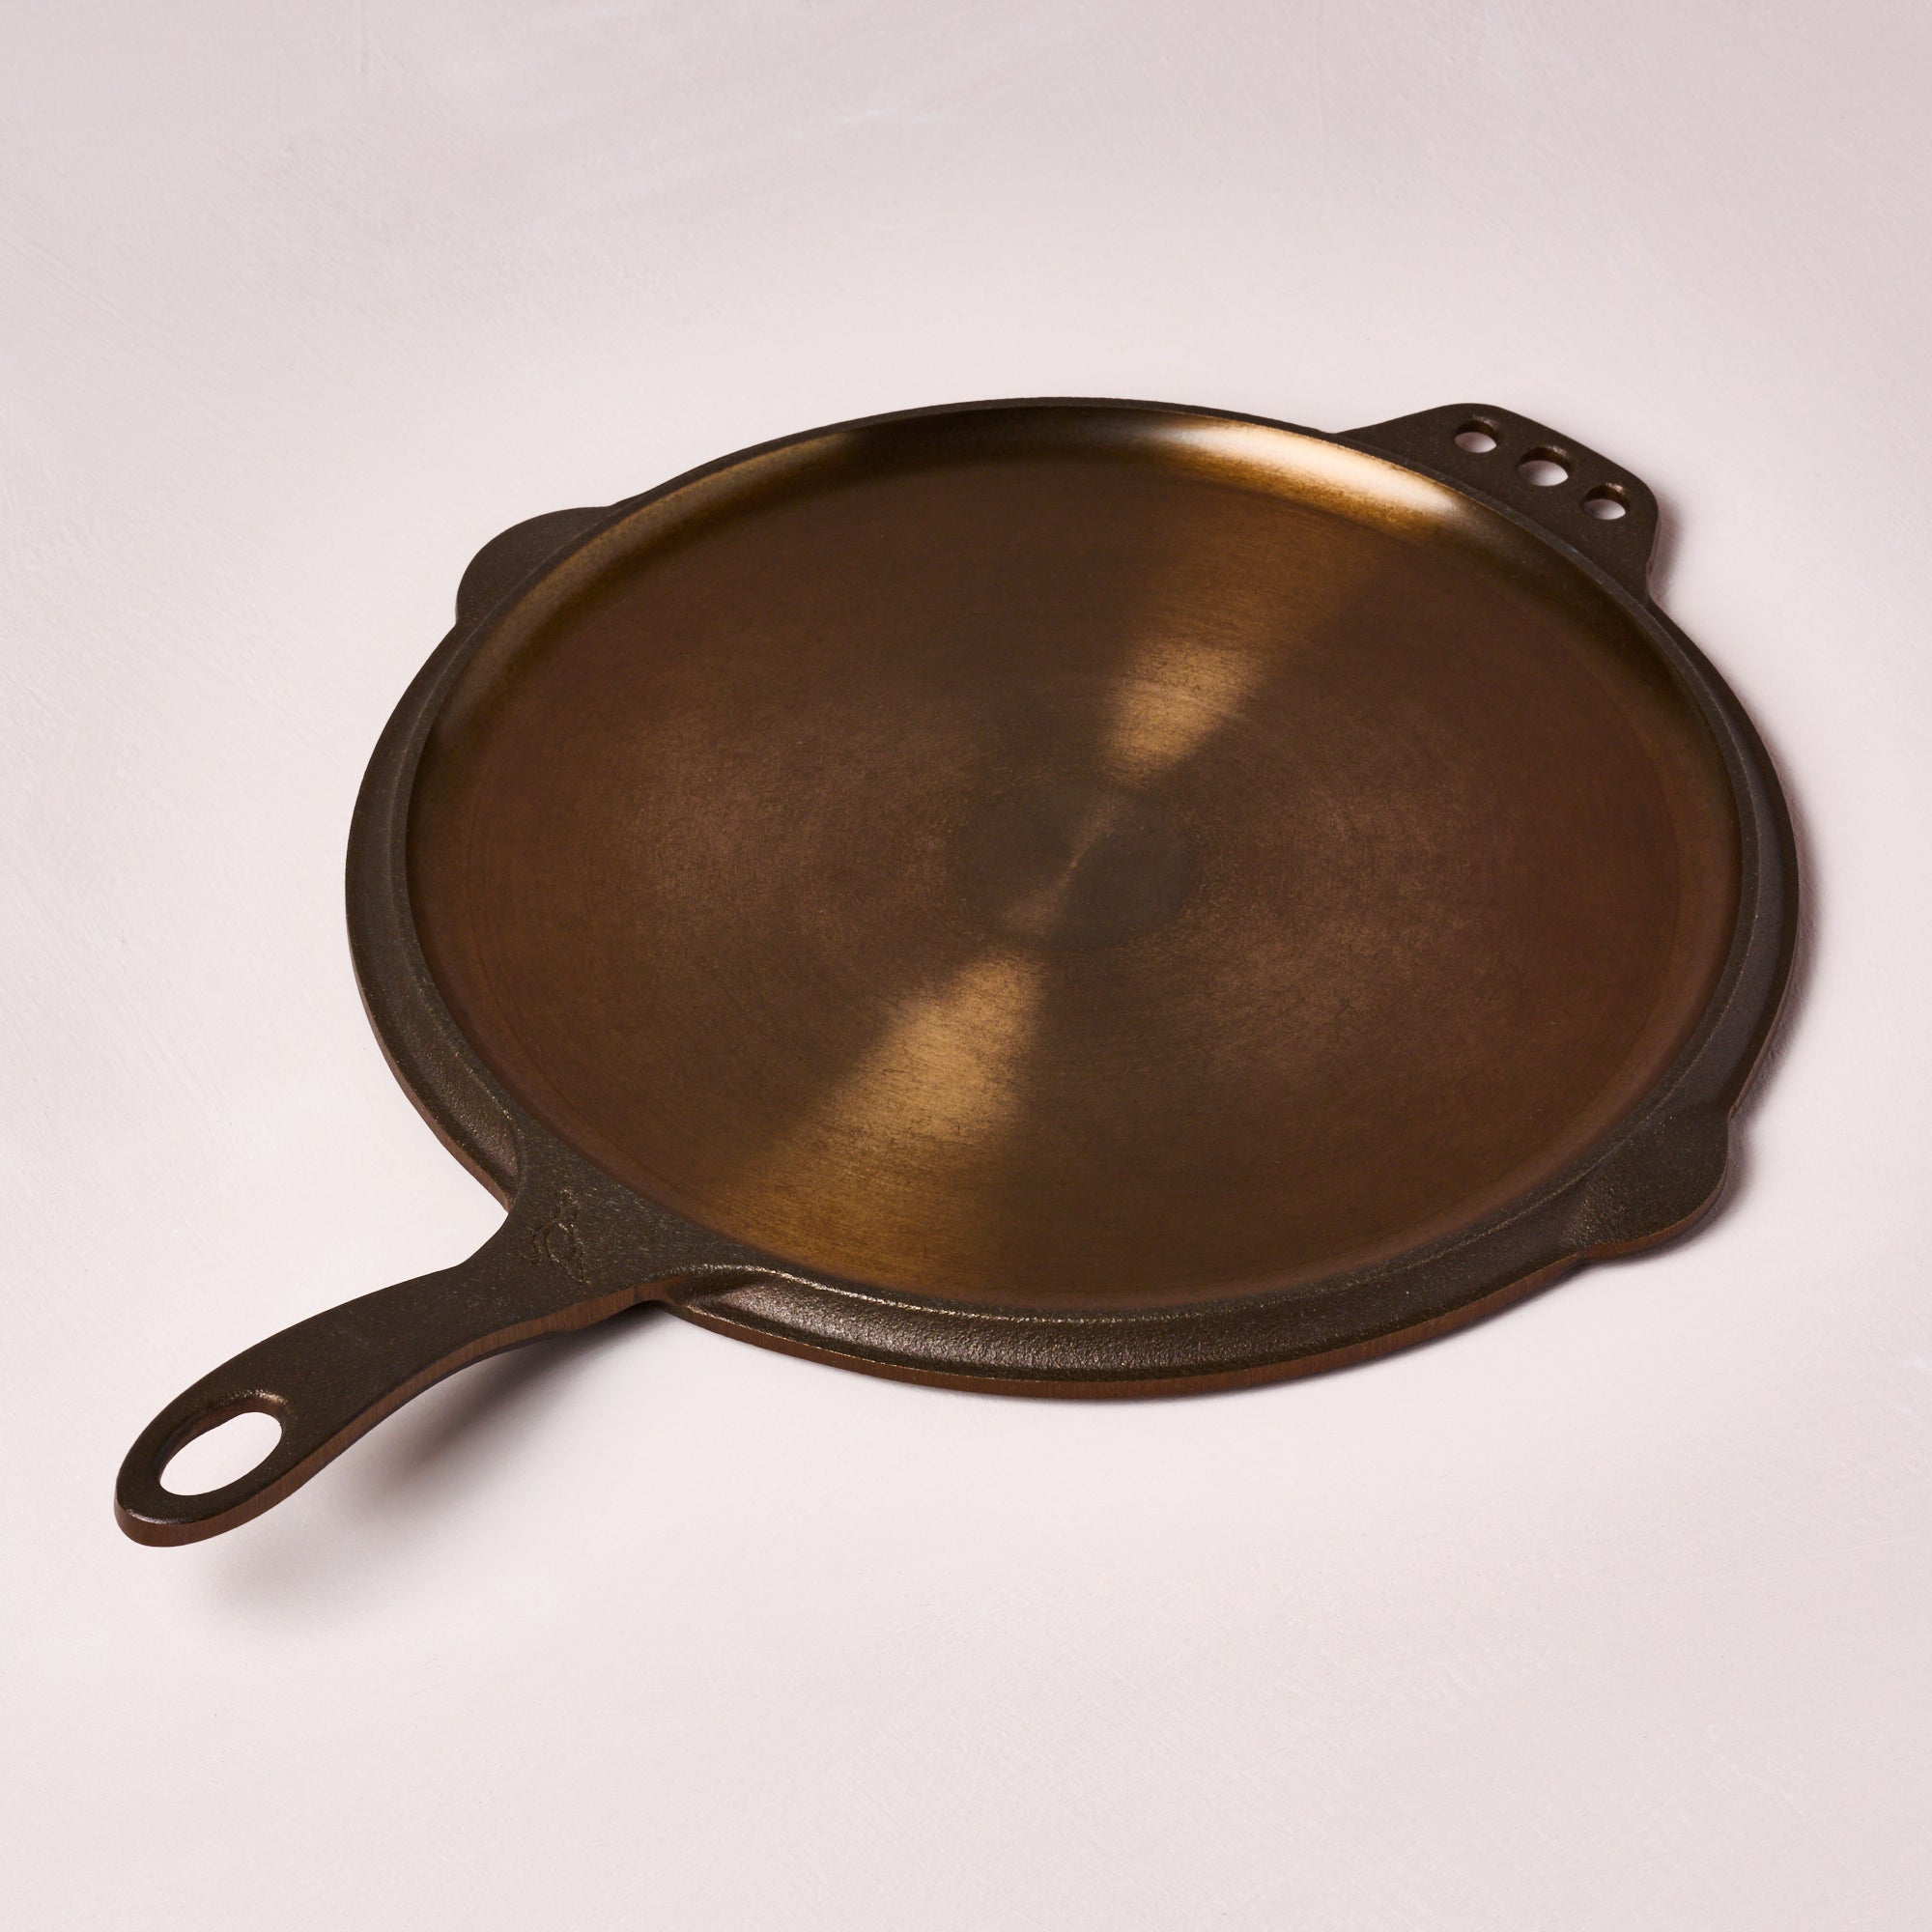 Smithey No. 12 Flat Top Griddle $135.00